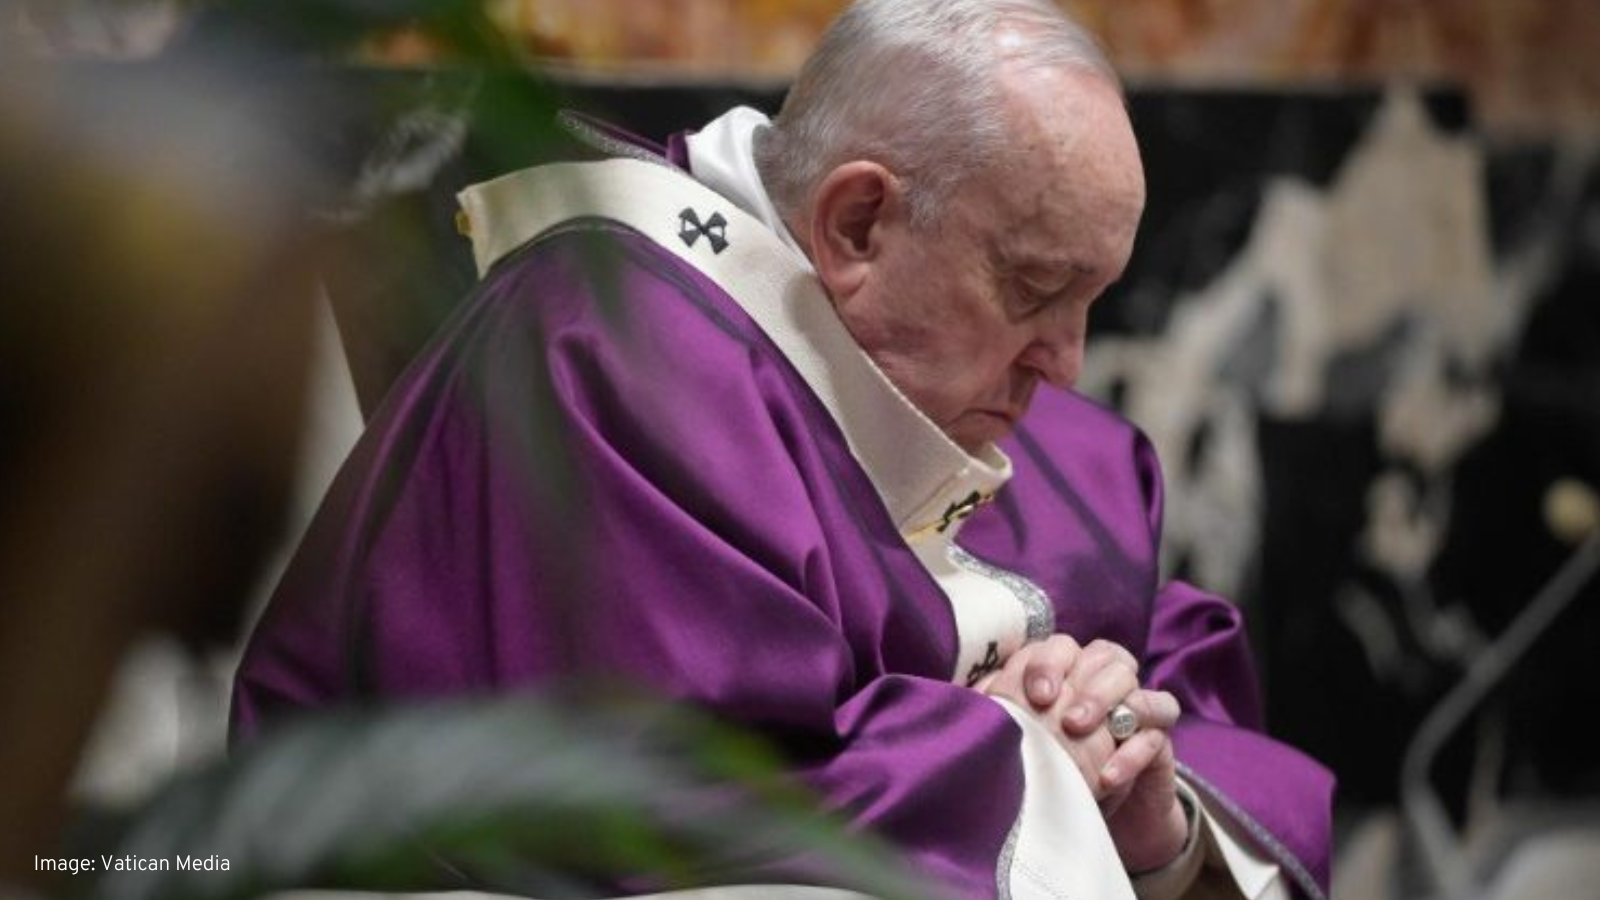 Pathways for Lent: the Holy Father’s guide